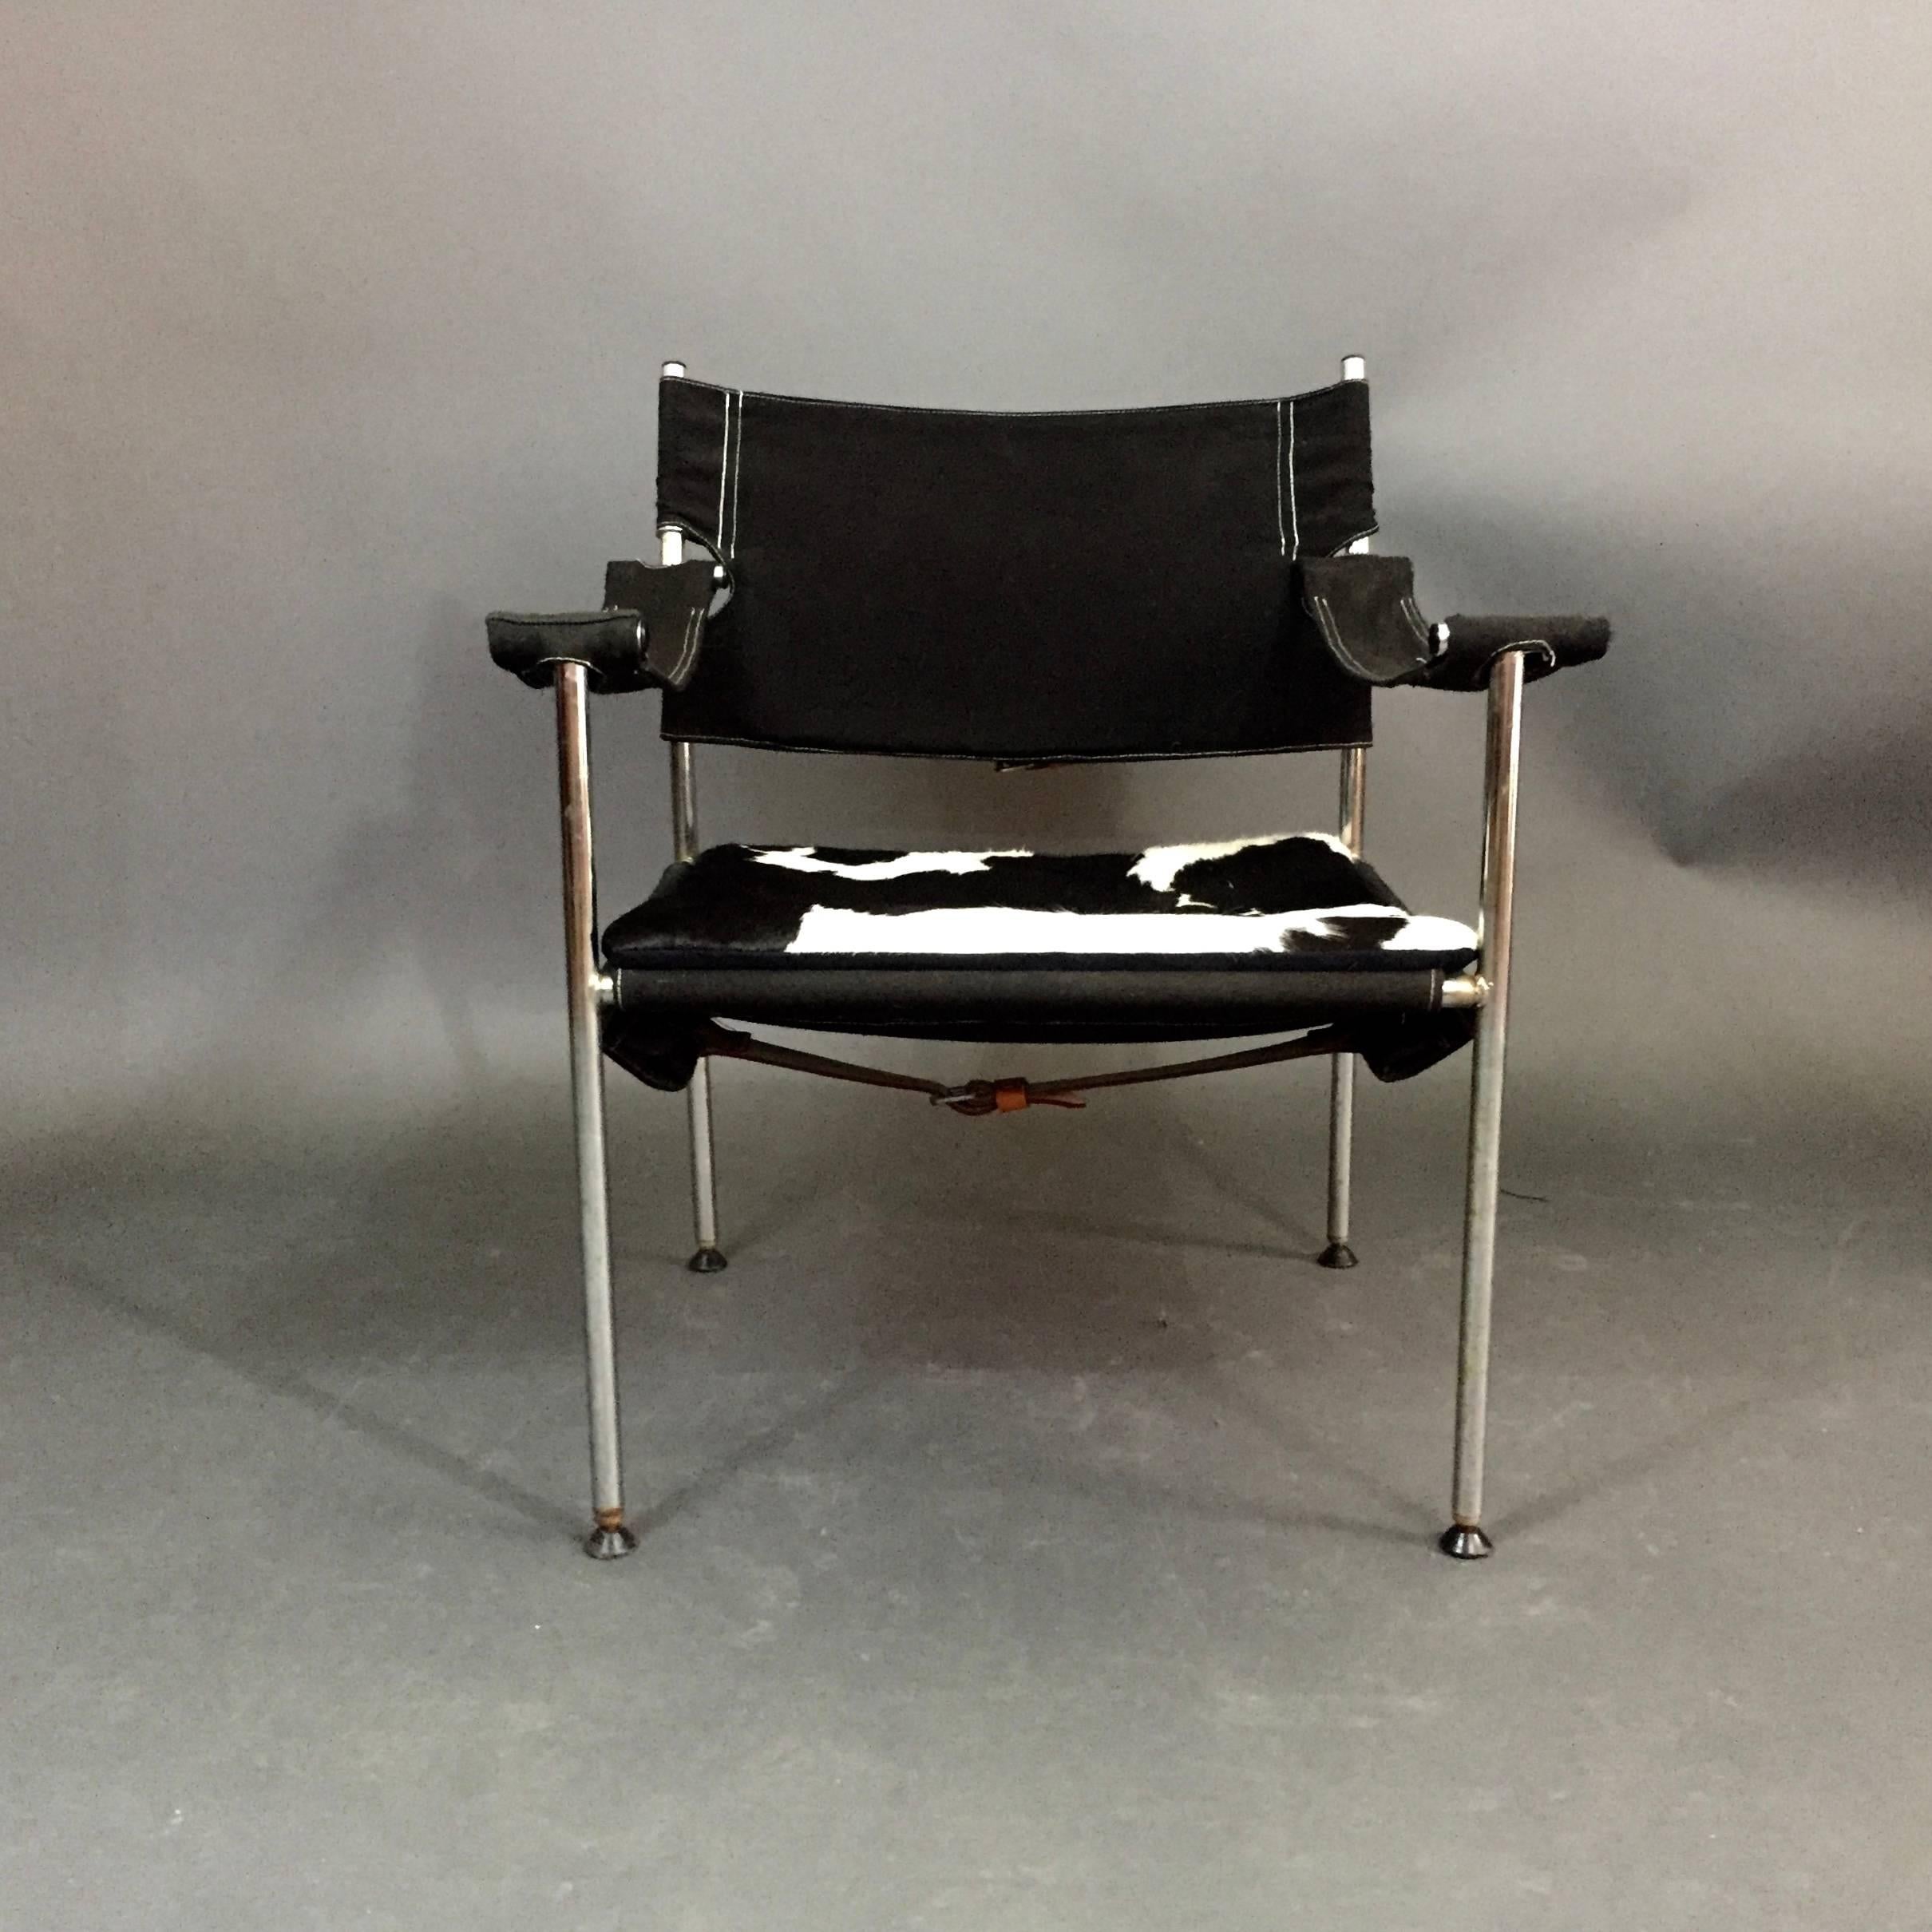 Designed by Sigurd Resell & Cato Mansrud for Anders Grasaasen's Fabrikker in Norway, circa 1965. The chair has a flexible chrome frame with black canvas sling support to seat, back and arms. Original and unique plastic foot pads. Back and underside